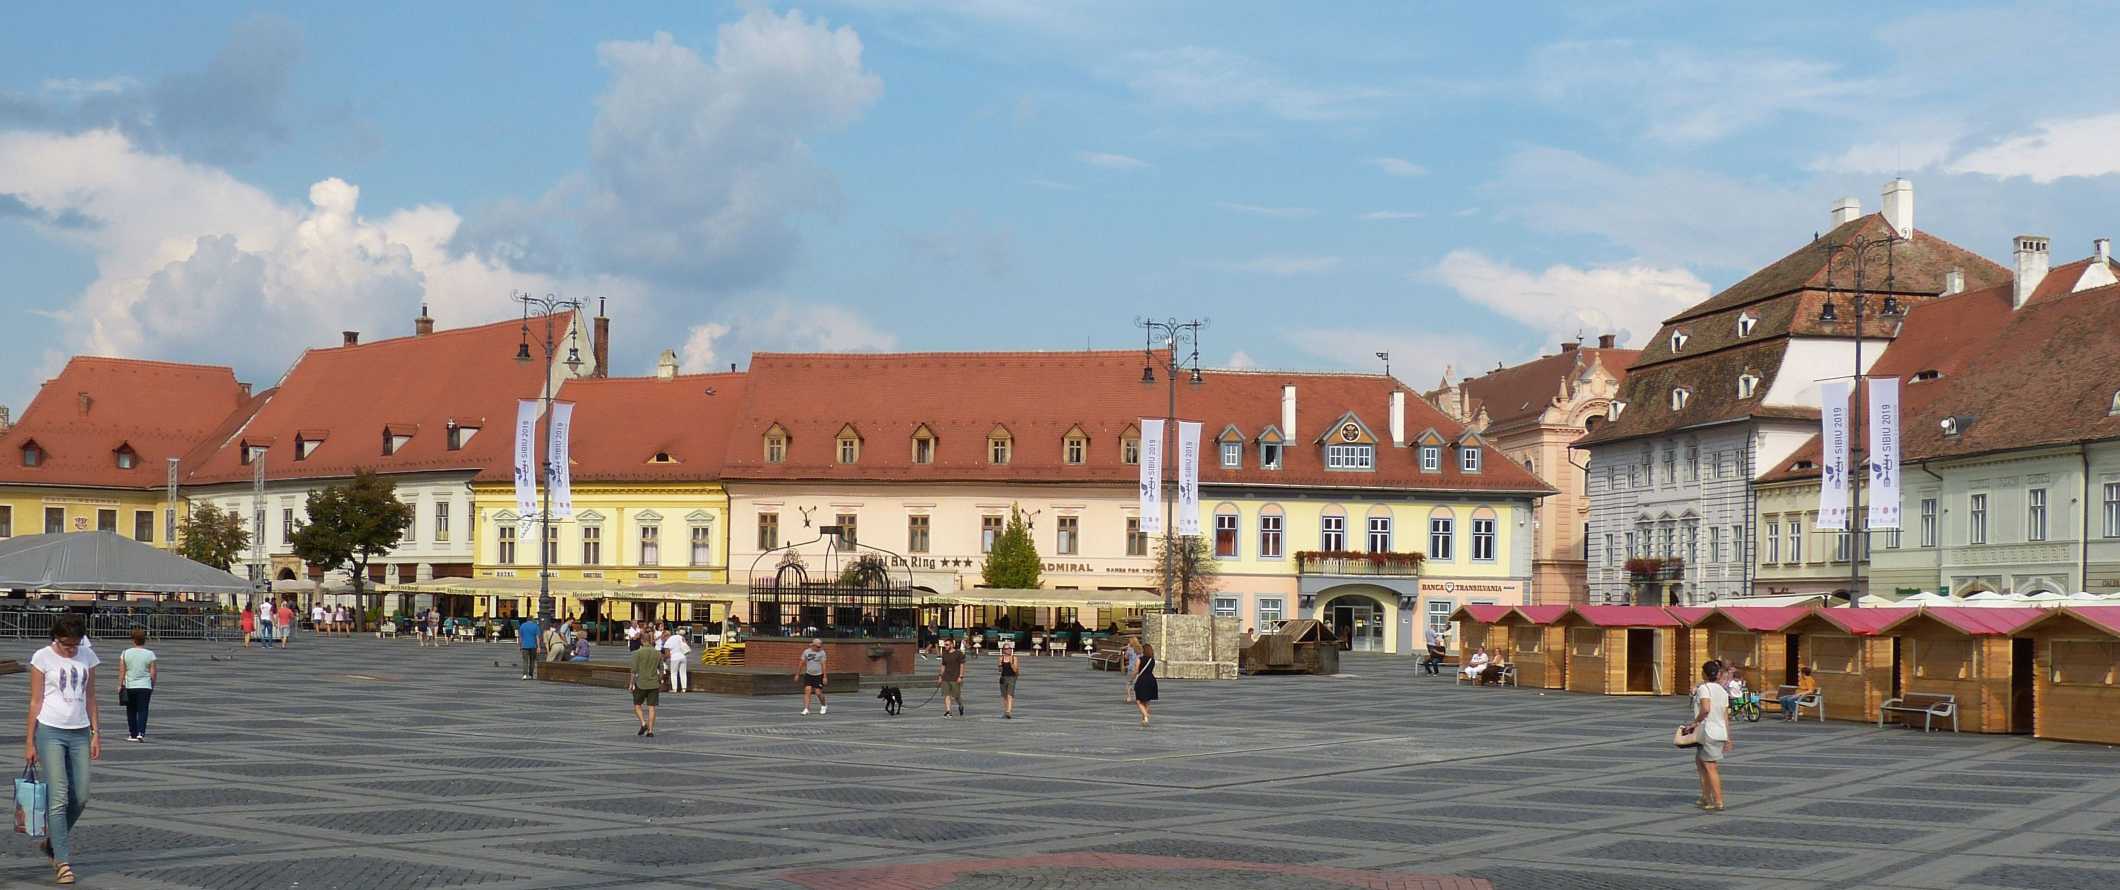 People walking through a Piata Huet, the main square in the historic Old Town in Sibiu, Romania